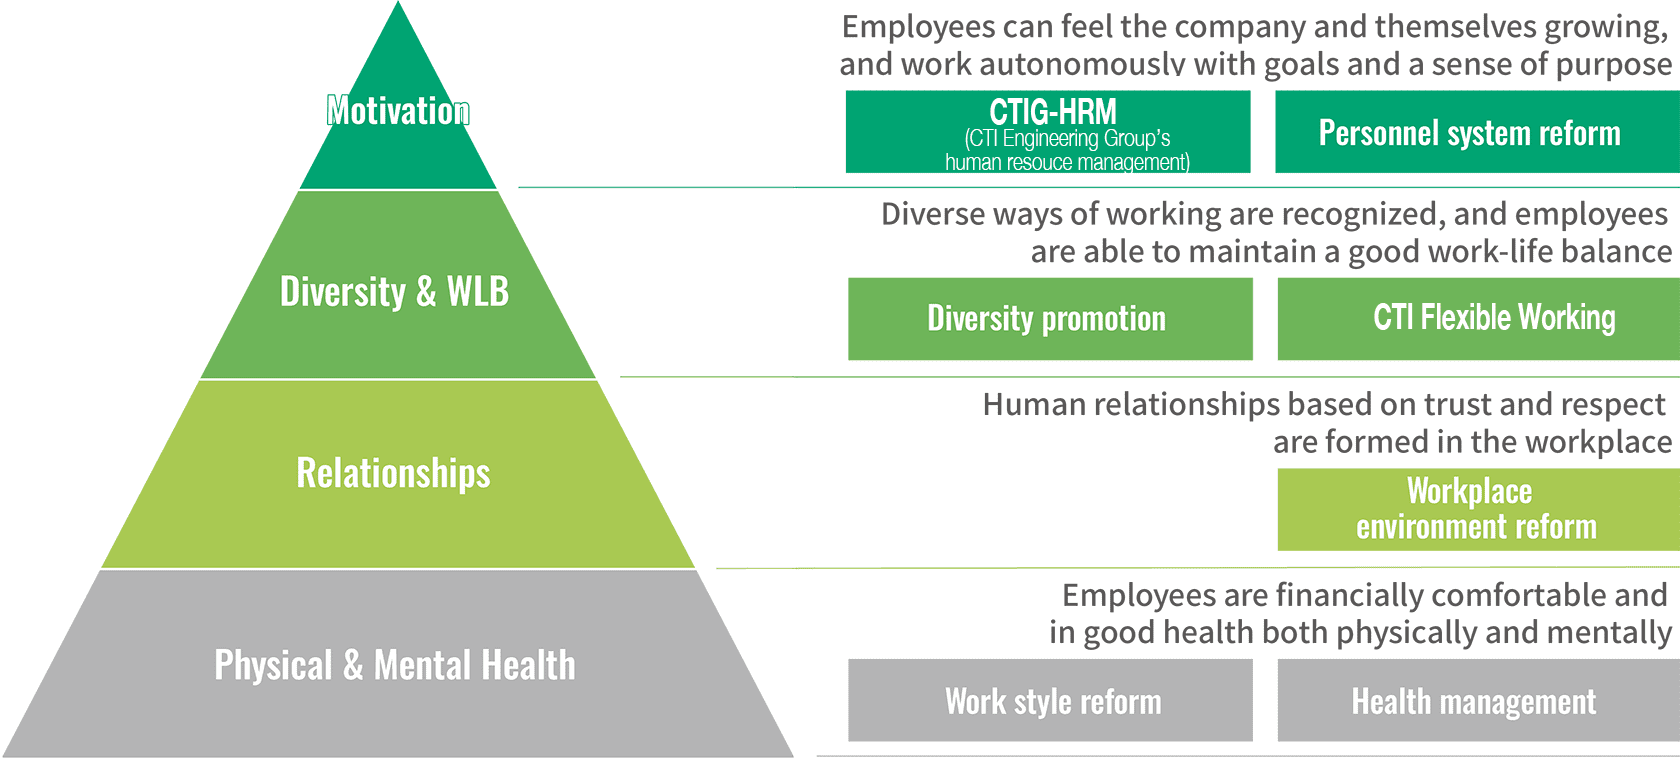 〈CTI’s Vision for Employees’ Well-Being and Initiatives〉